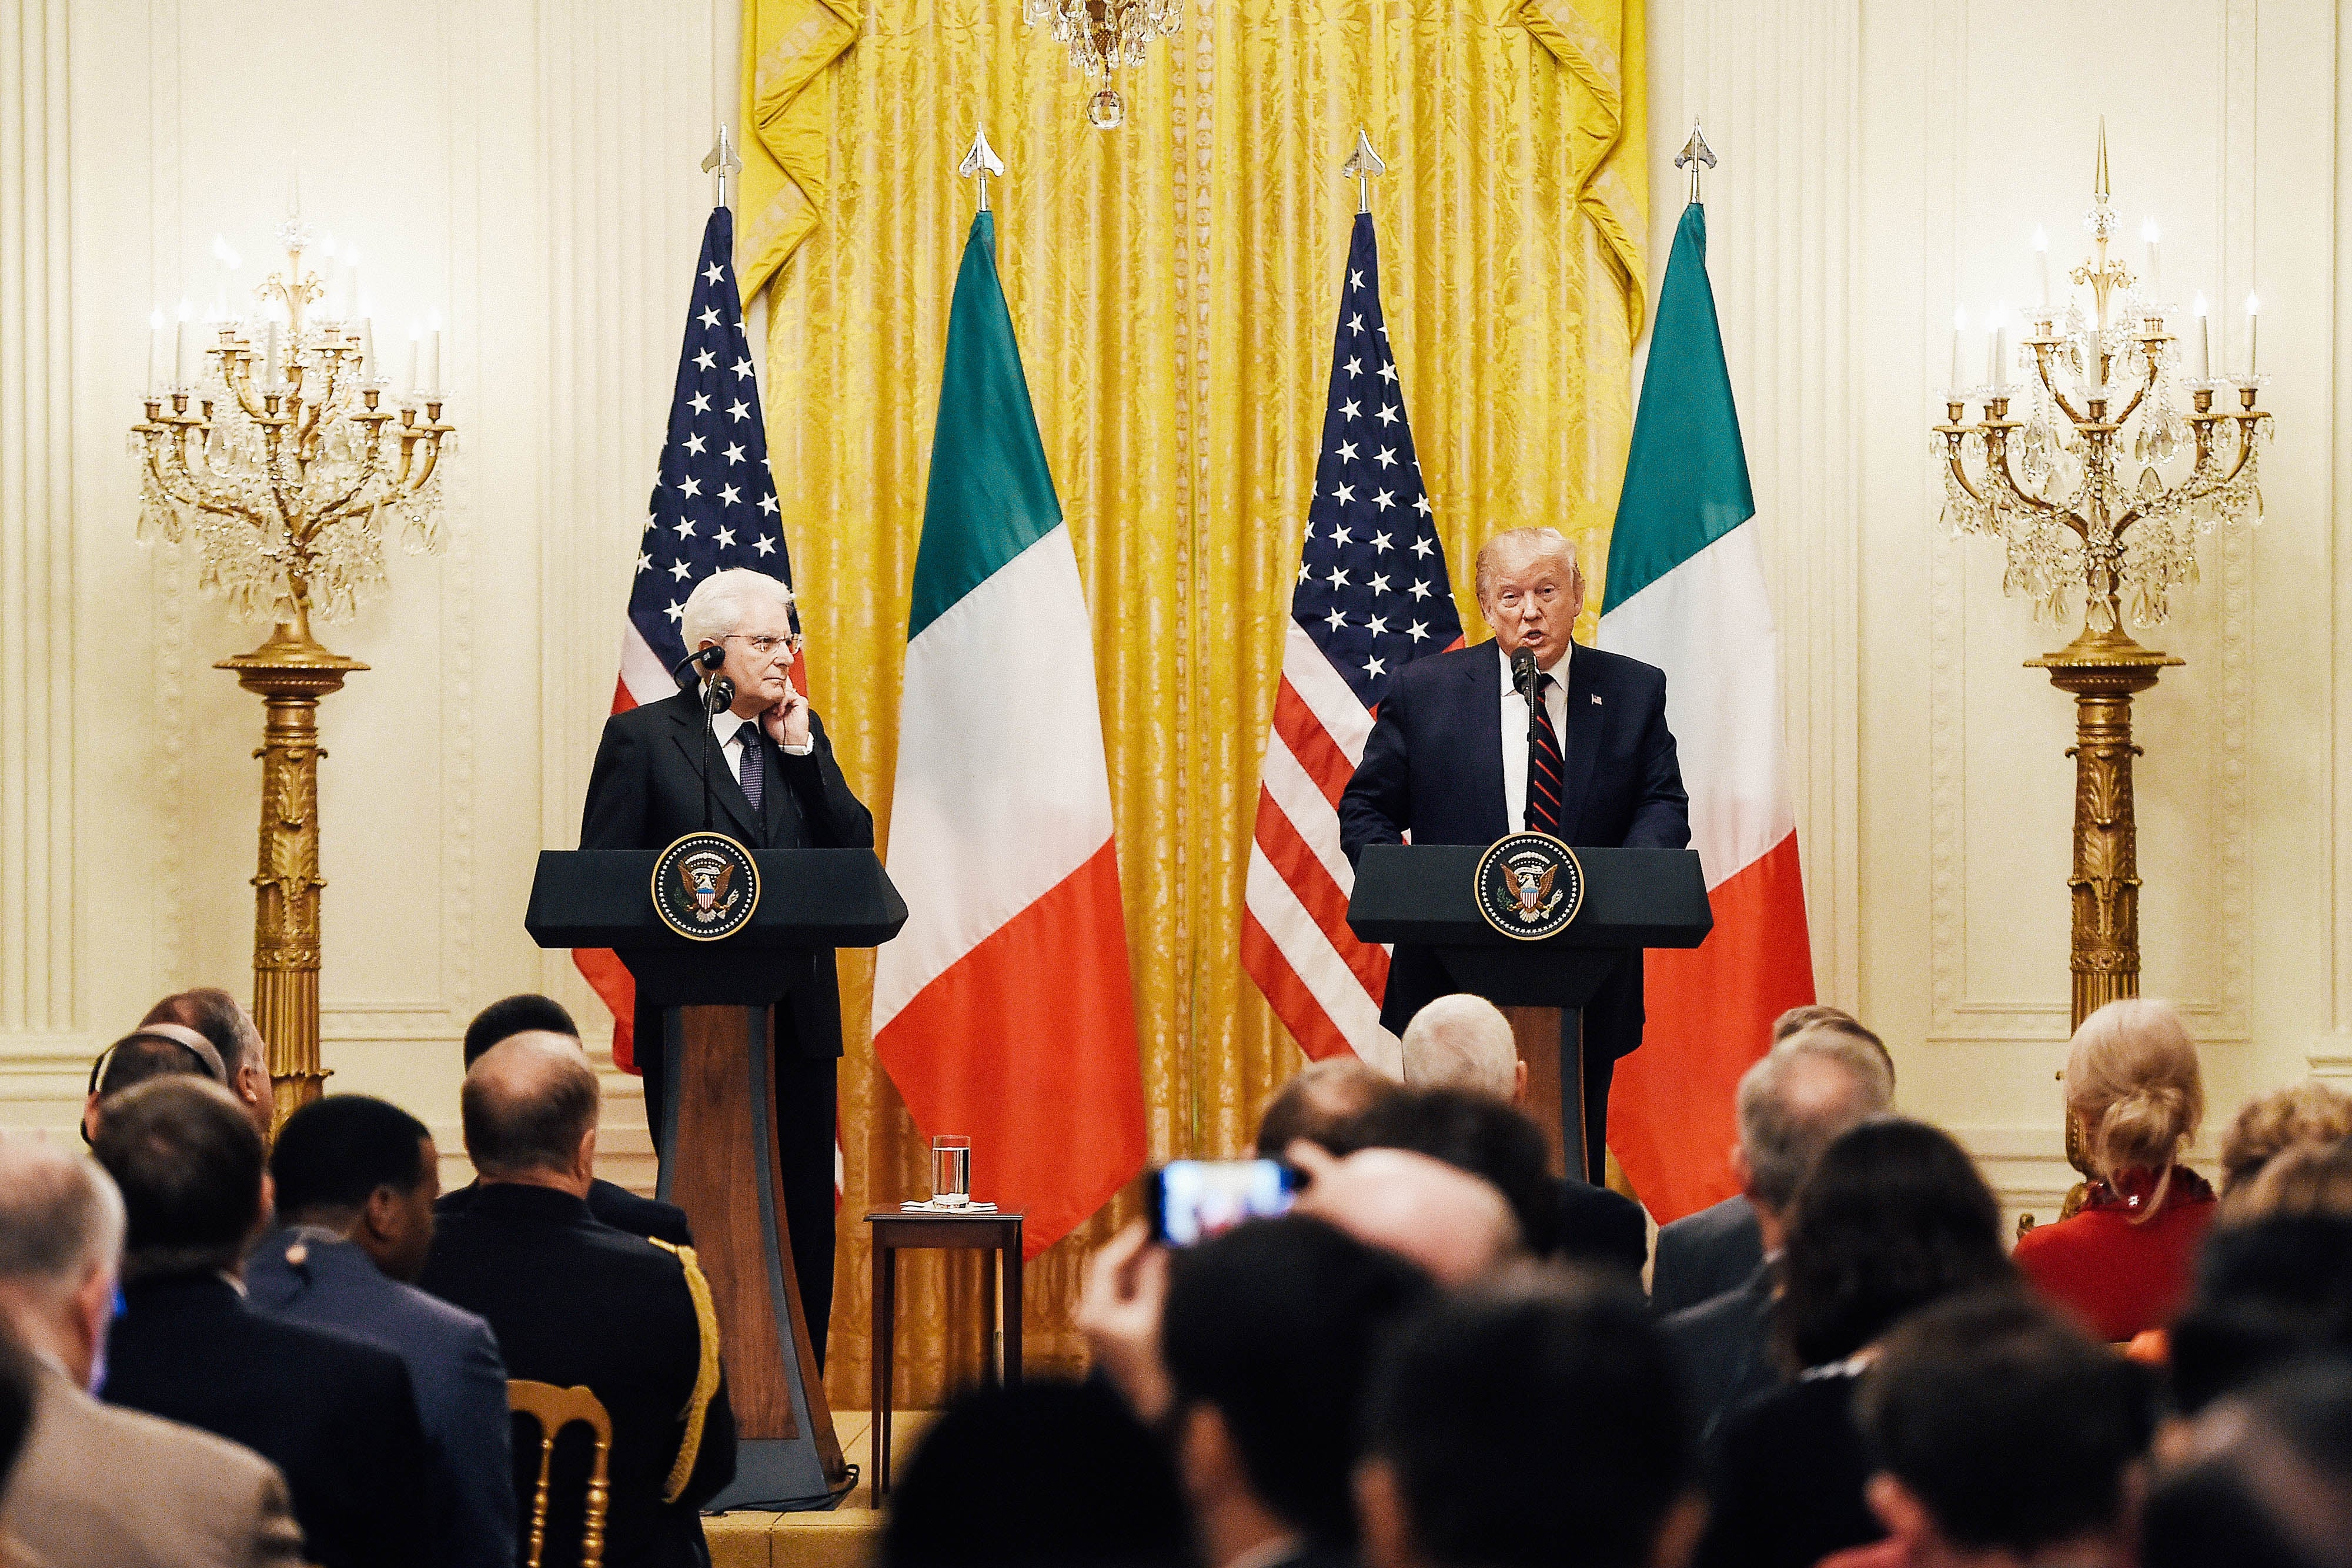 Trump and the Italian president at podiums in front of American and Italian flags.